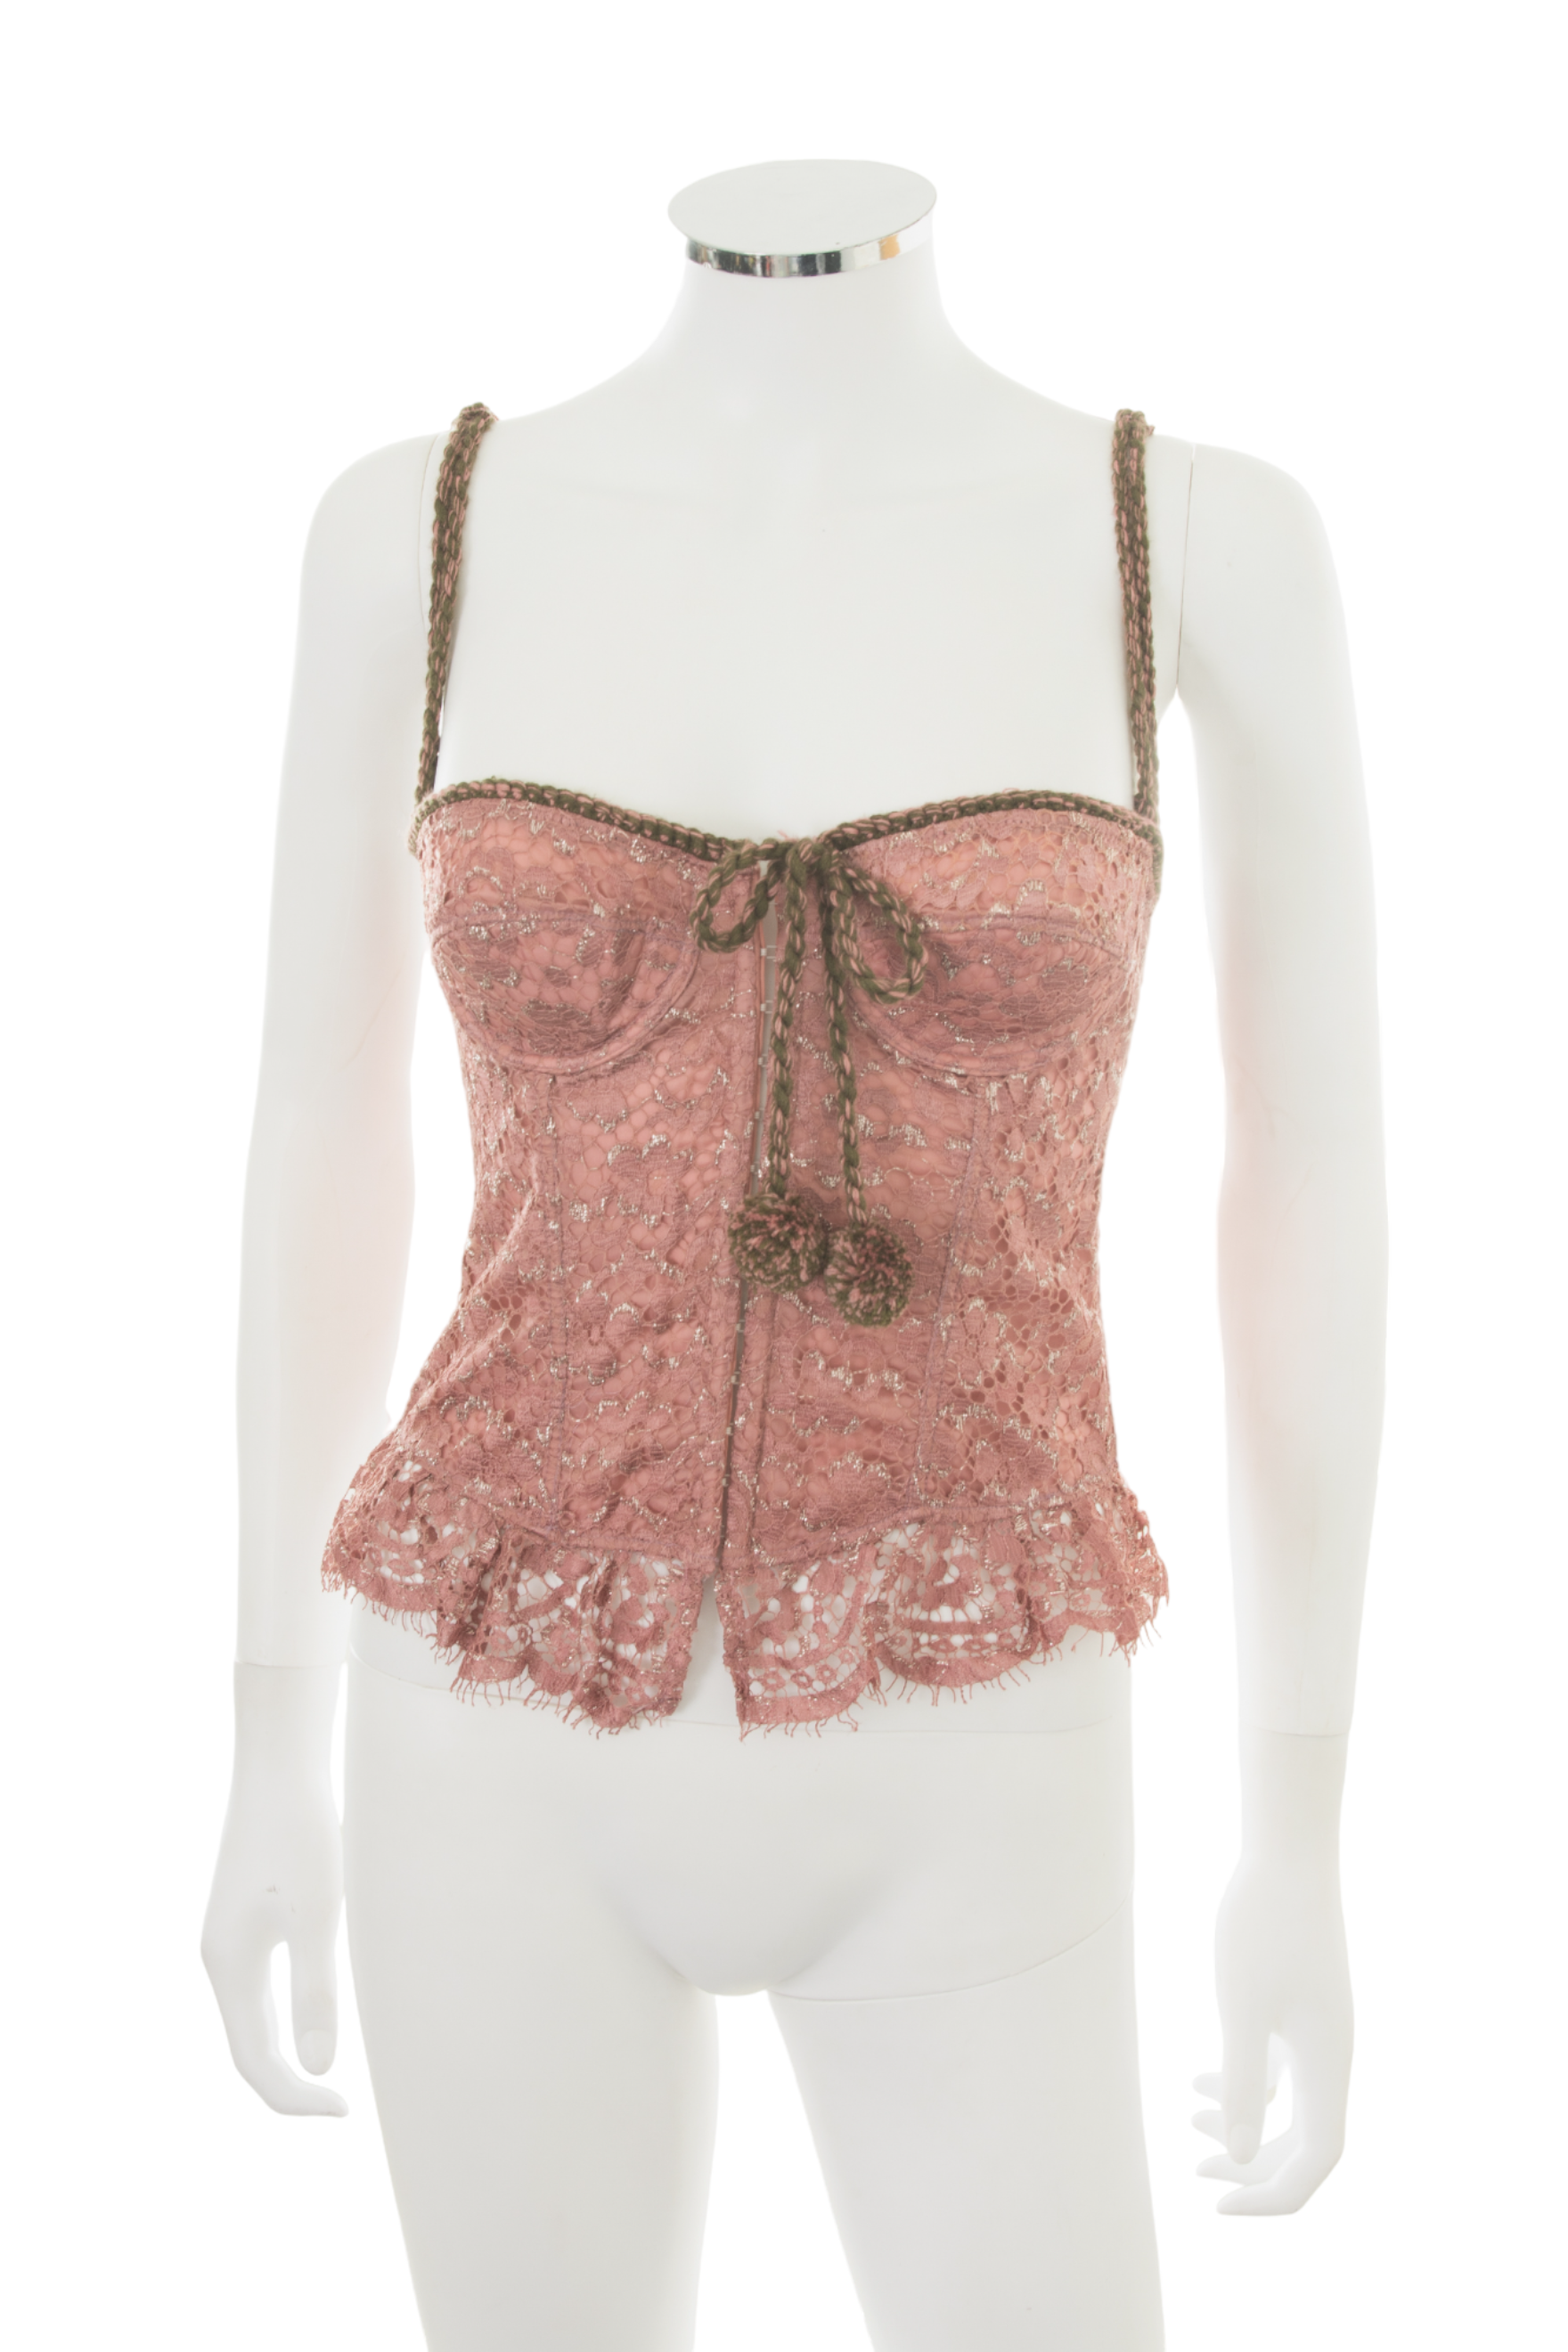 Moschino Lace Corset Top